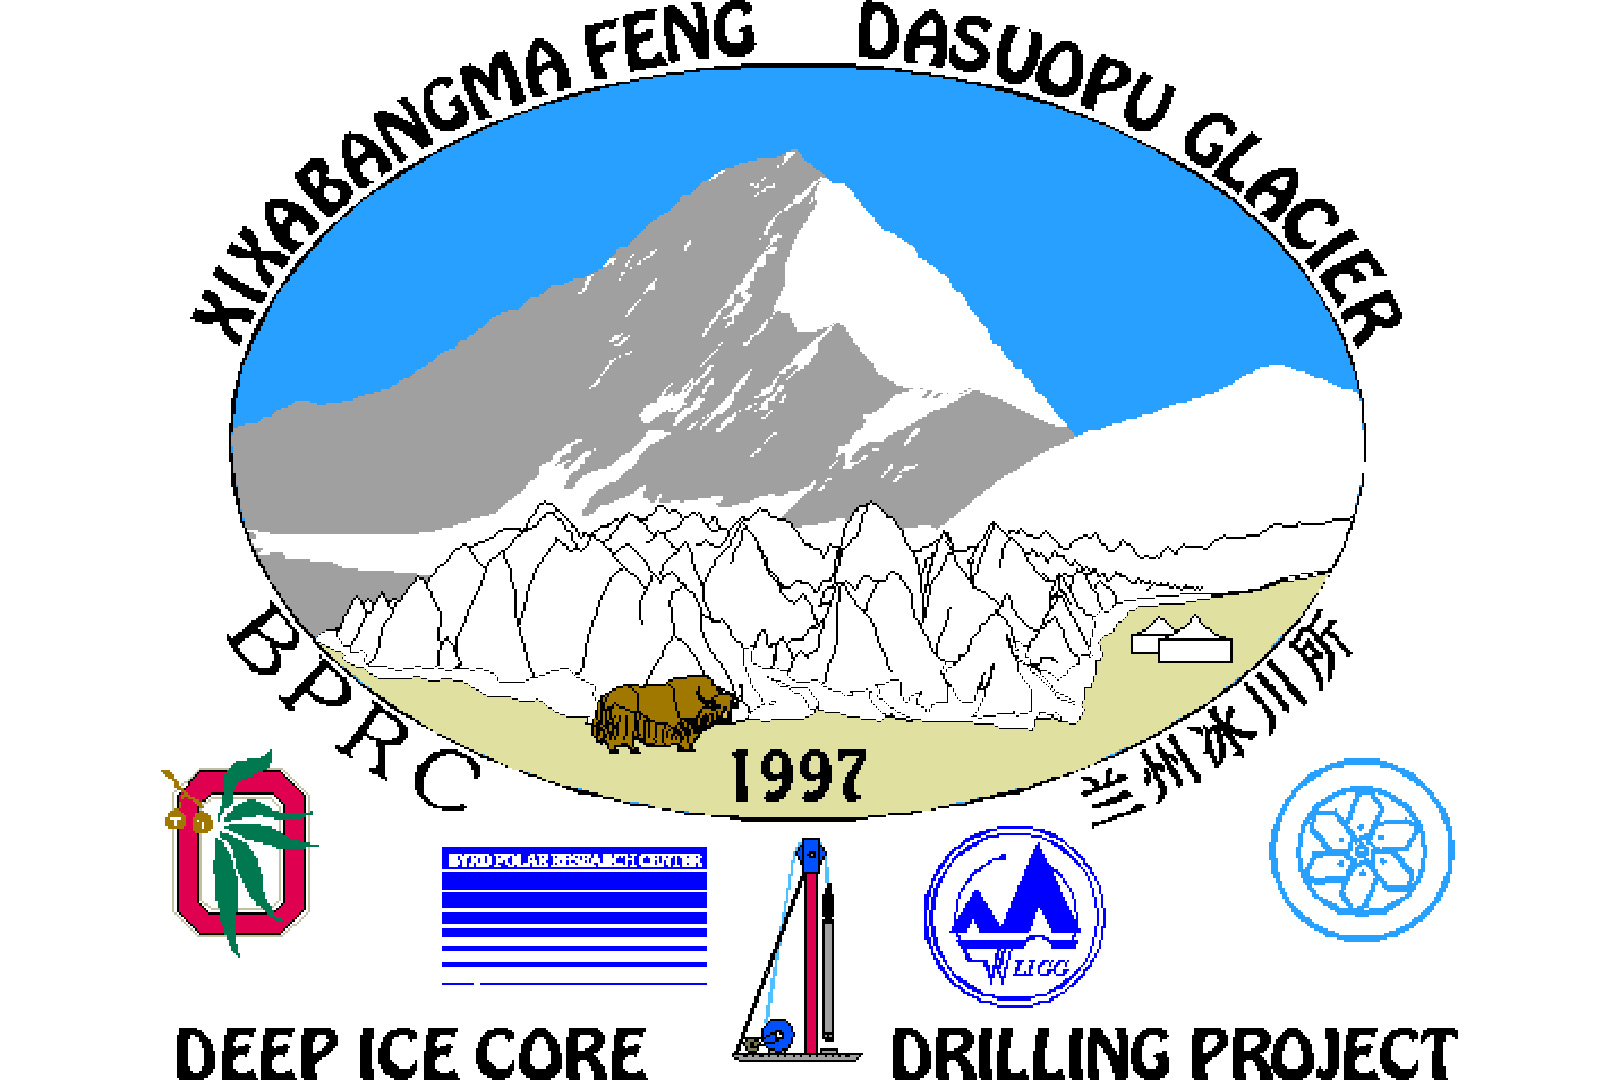 A sticker logo of the Deep Ice Core Drilling Project with several icons and a main image of a white mountain peak with green grass under blue skies 1997 Dasuopu Glacier.